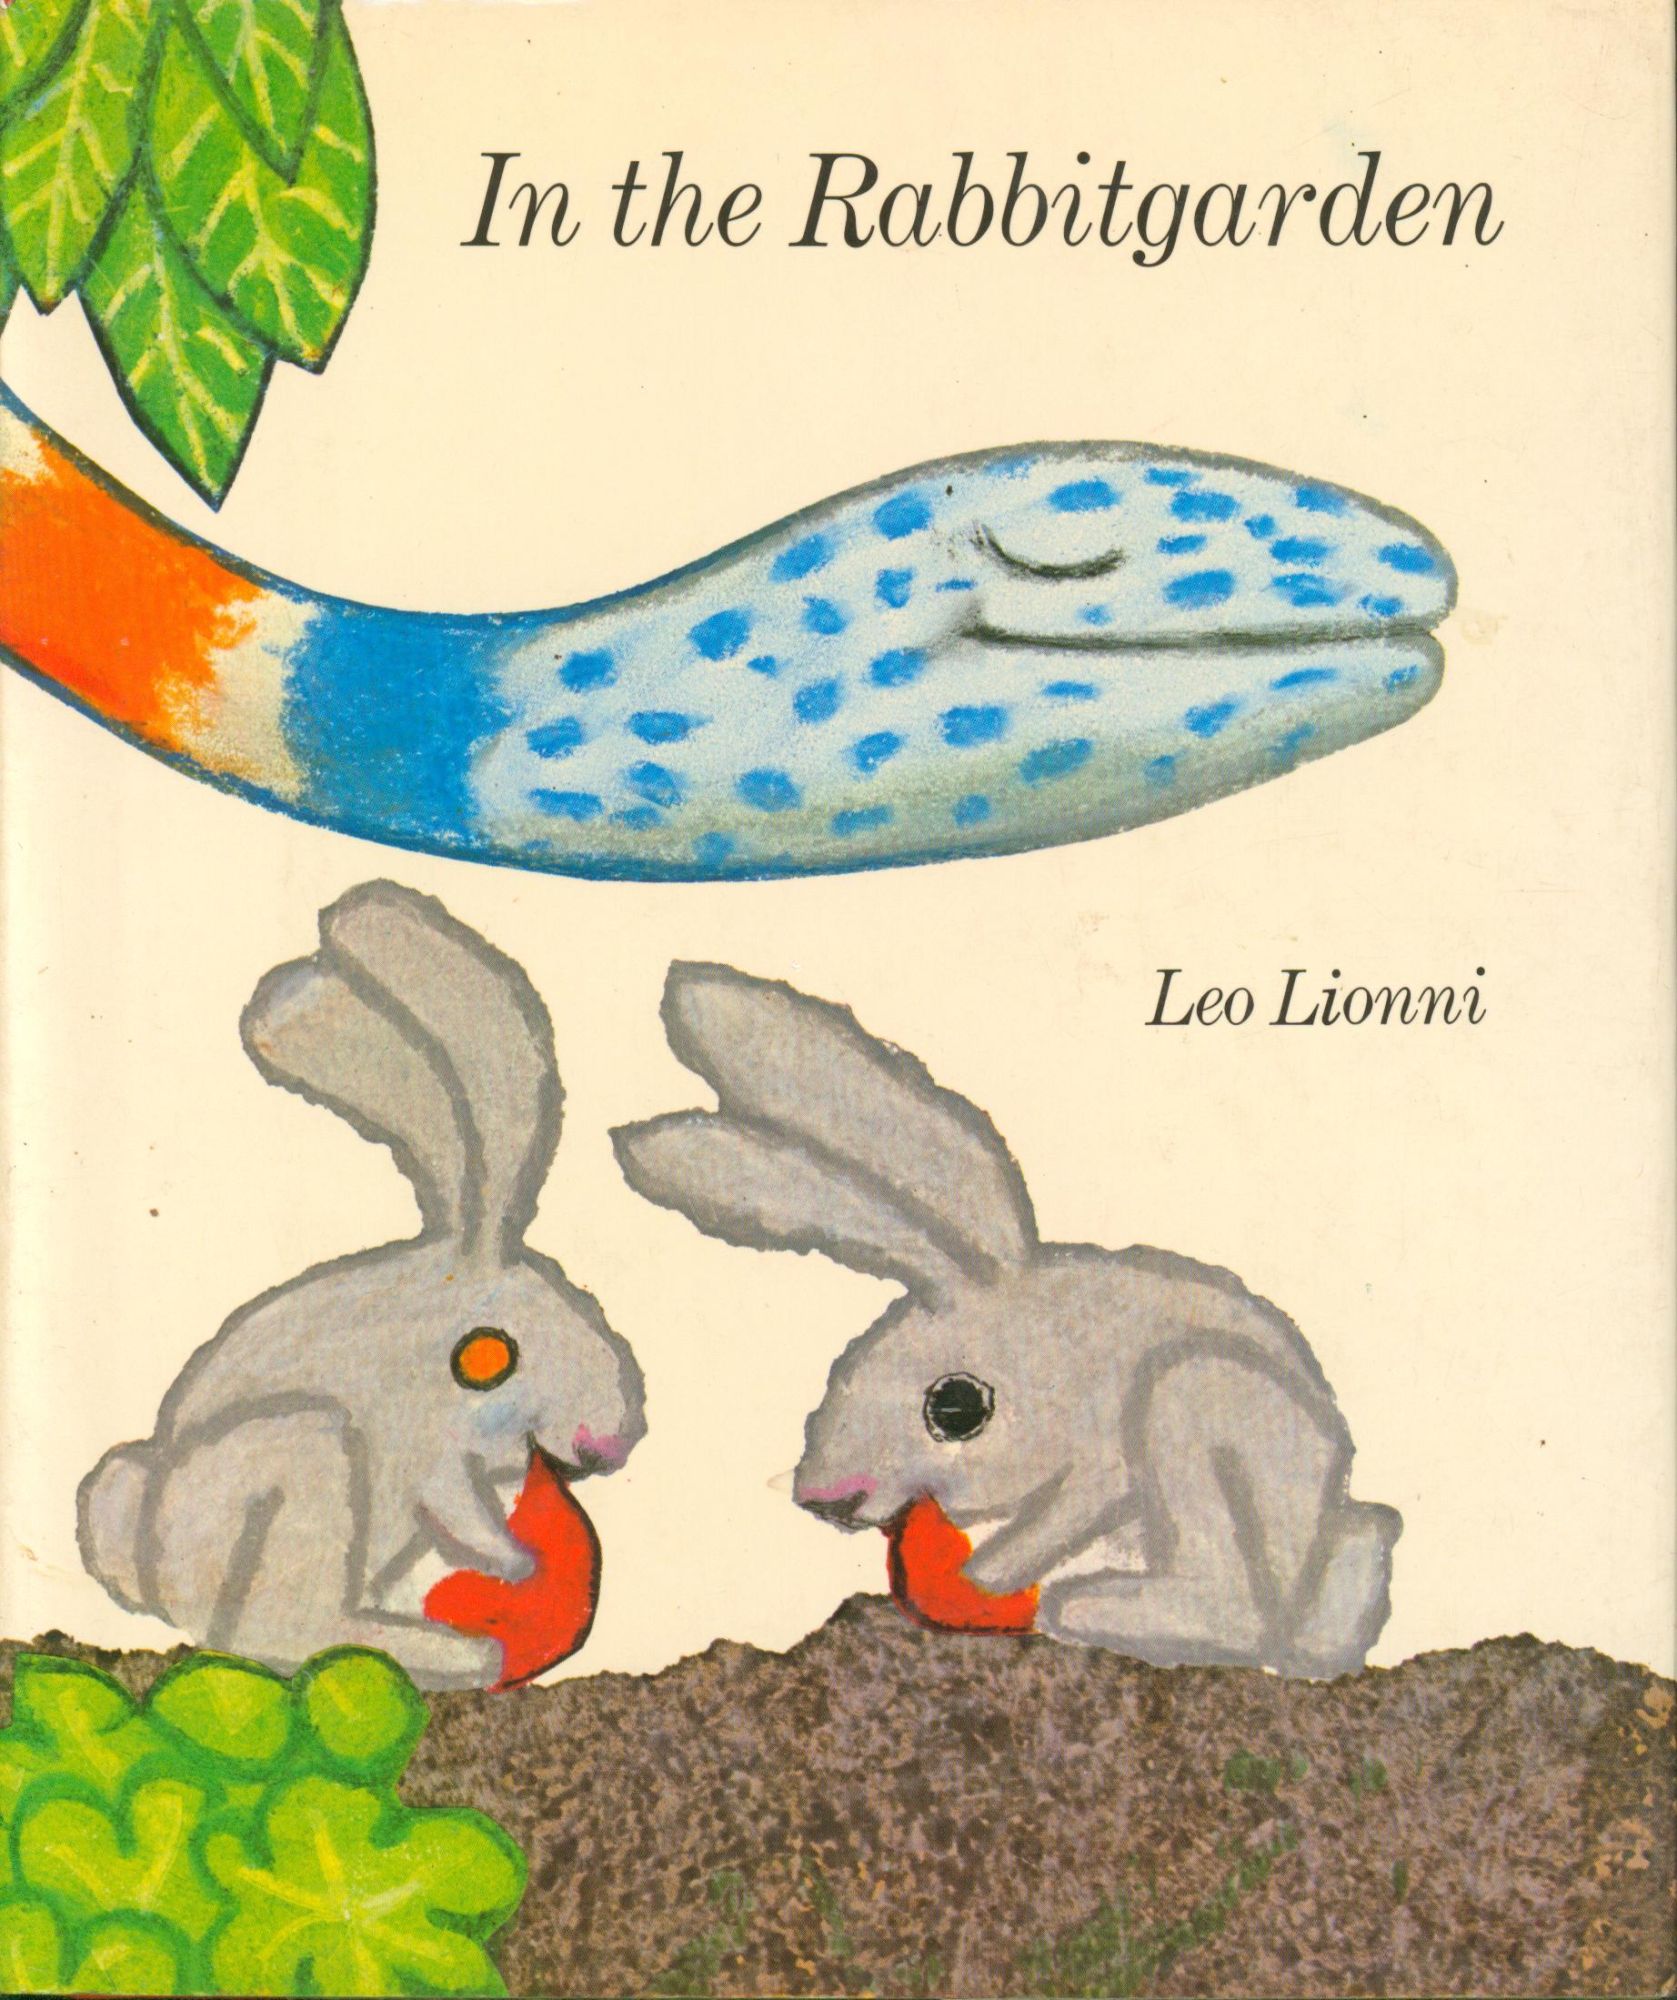 In the Rabbitgarden by Leo Lionni on Bud Plant & Hutchison Books